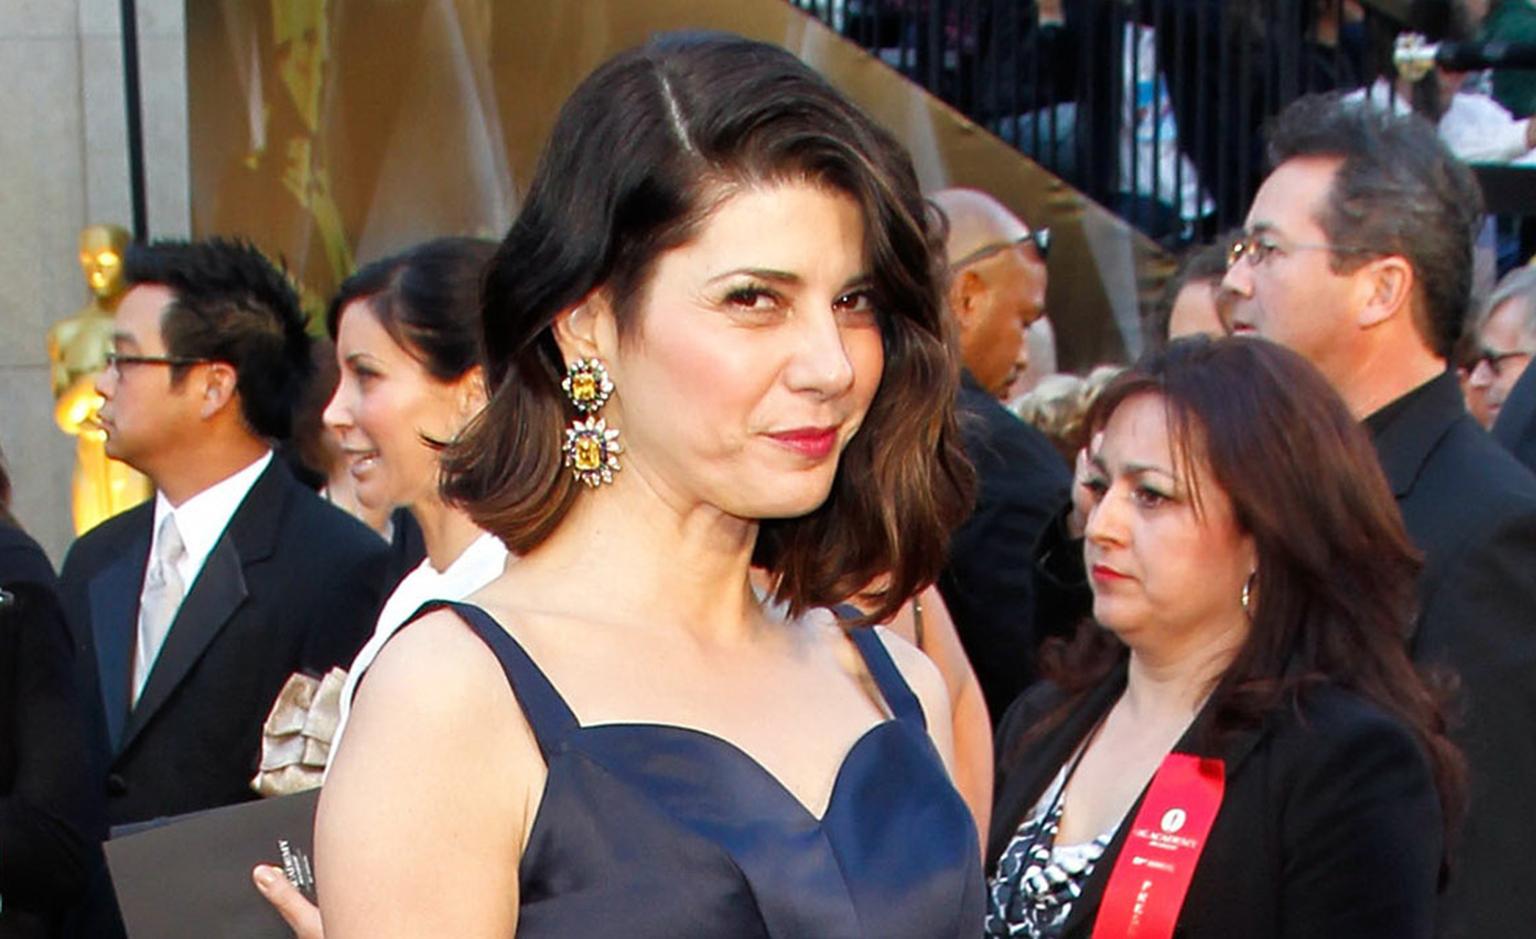 Marisa Tomei chose vintage Van Cleef & Arpels jewels. She wore 1960 yellow and blue sapphire, emerald and diamond earrings and bracelet made for a private client by Van Cleef & Arpels, New York